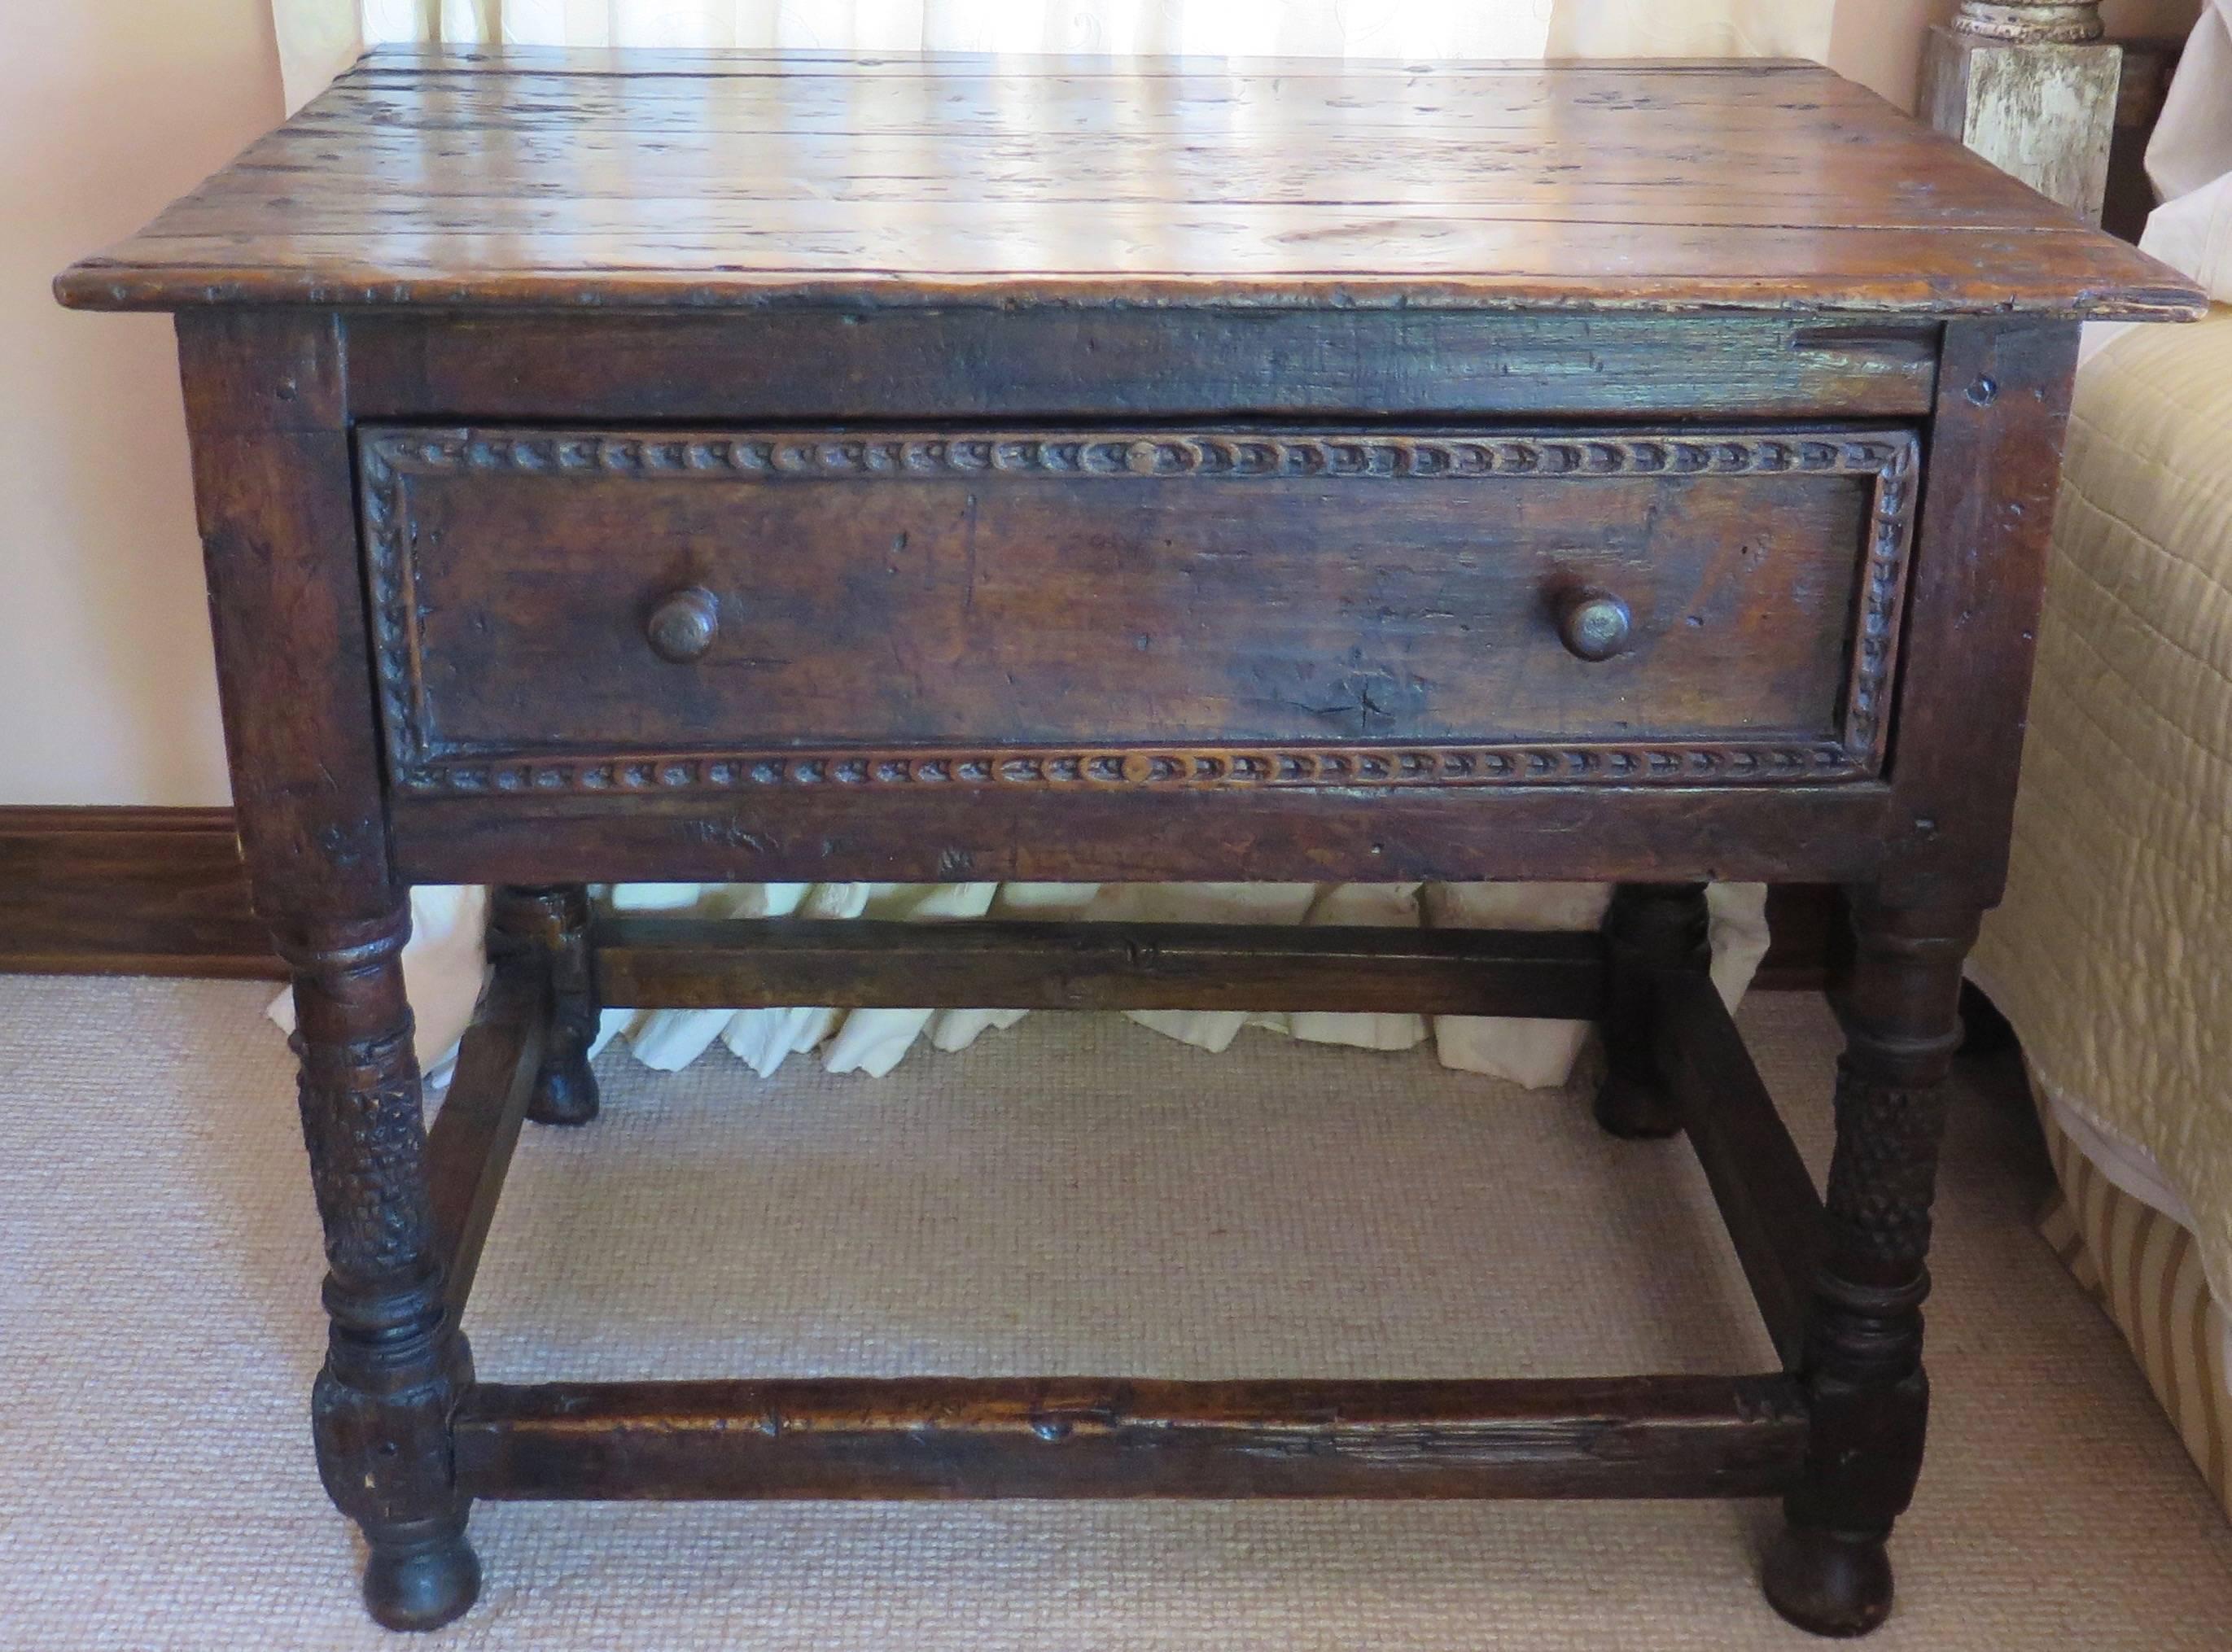 Beautiful early Spanish Colonial table with carved details.